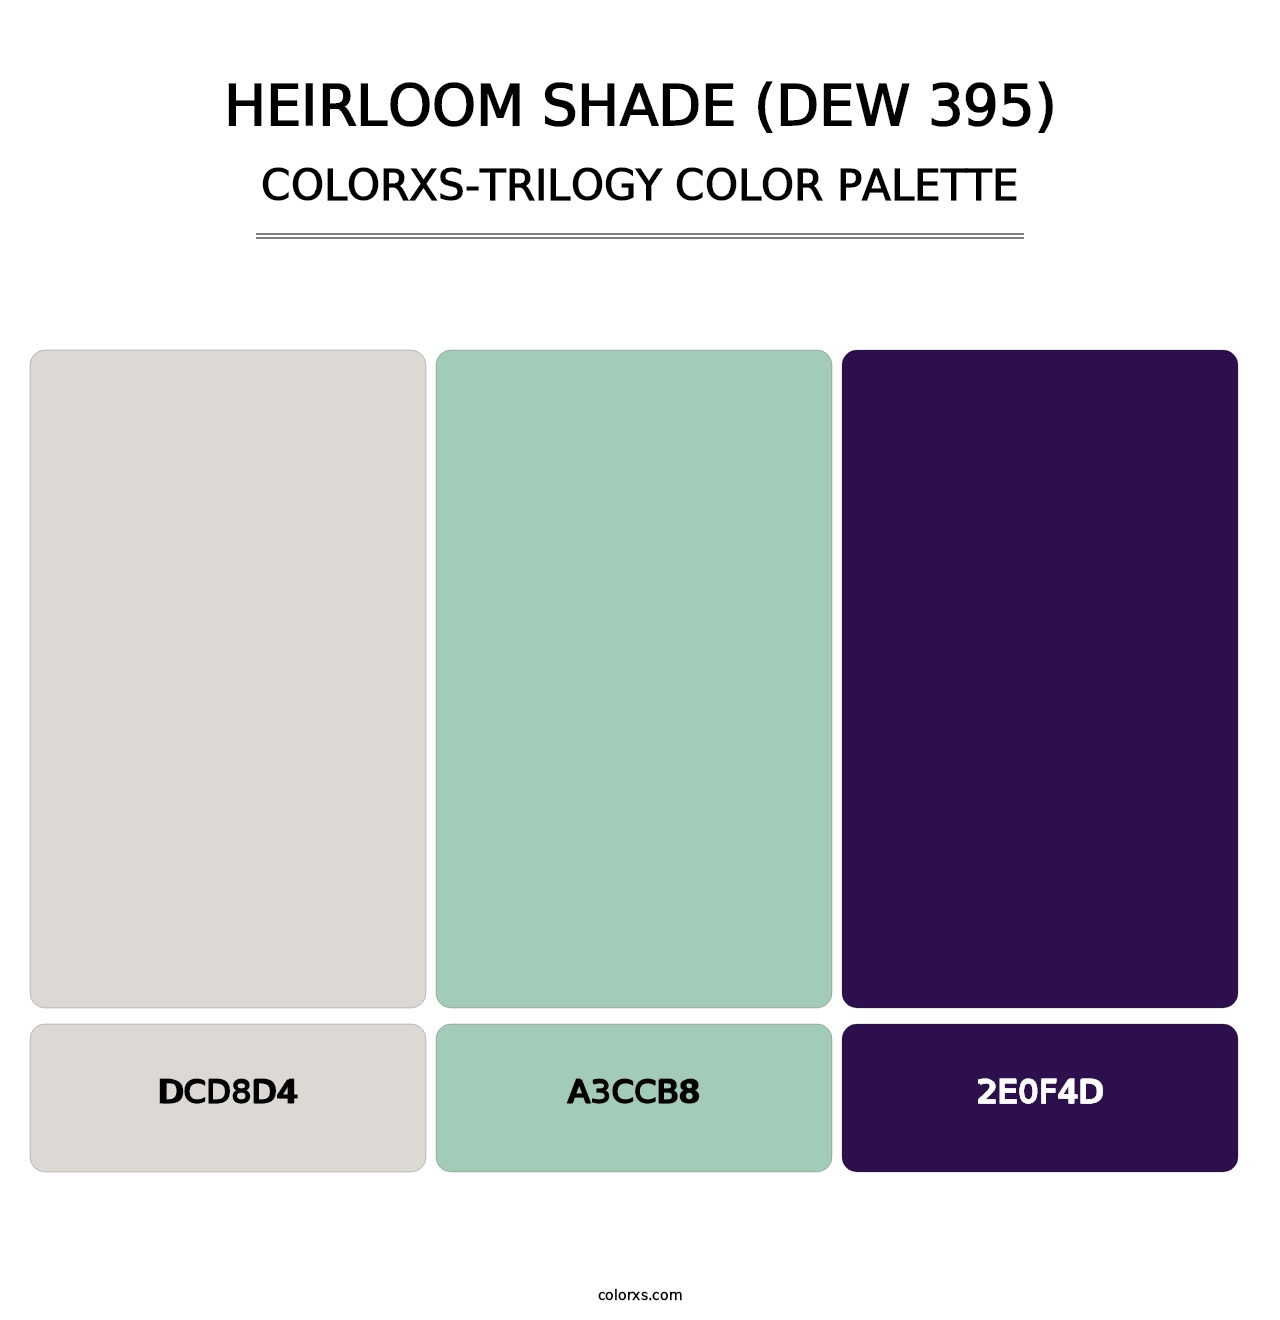 Heirloom Shade (DEW 395) - Colorxs Trilogy Palette